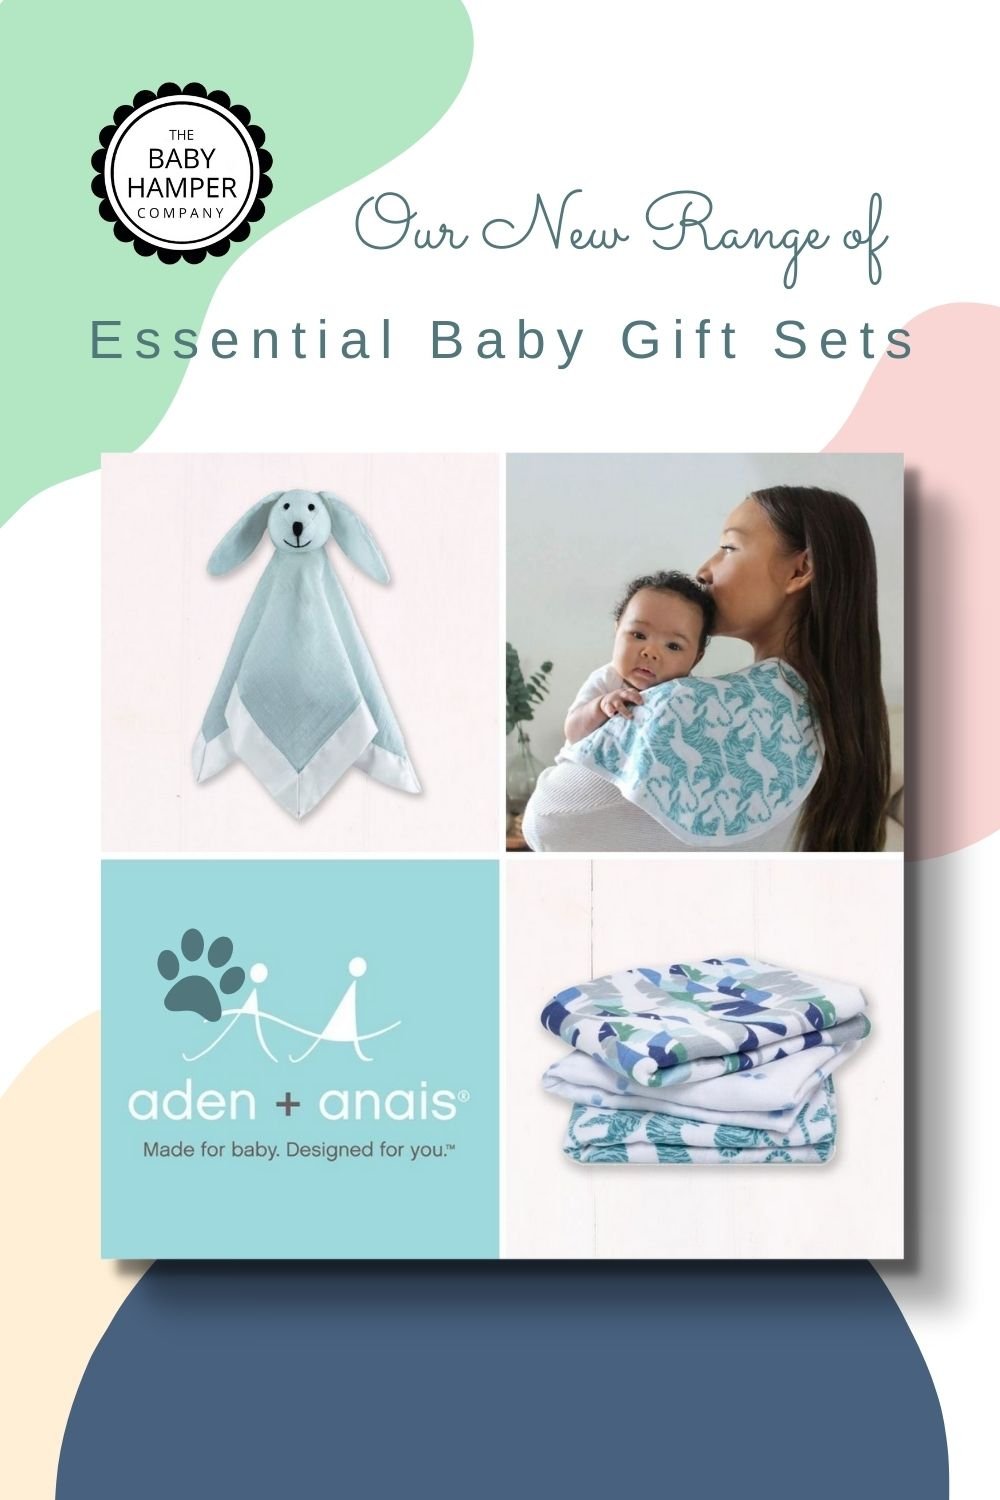 Our New Range of essential baby gift sets